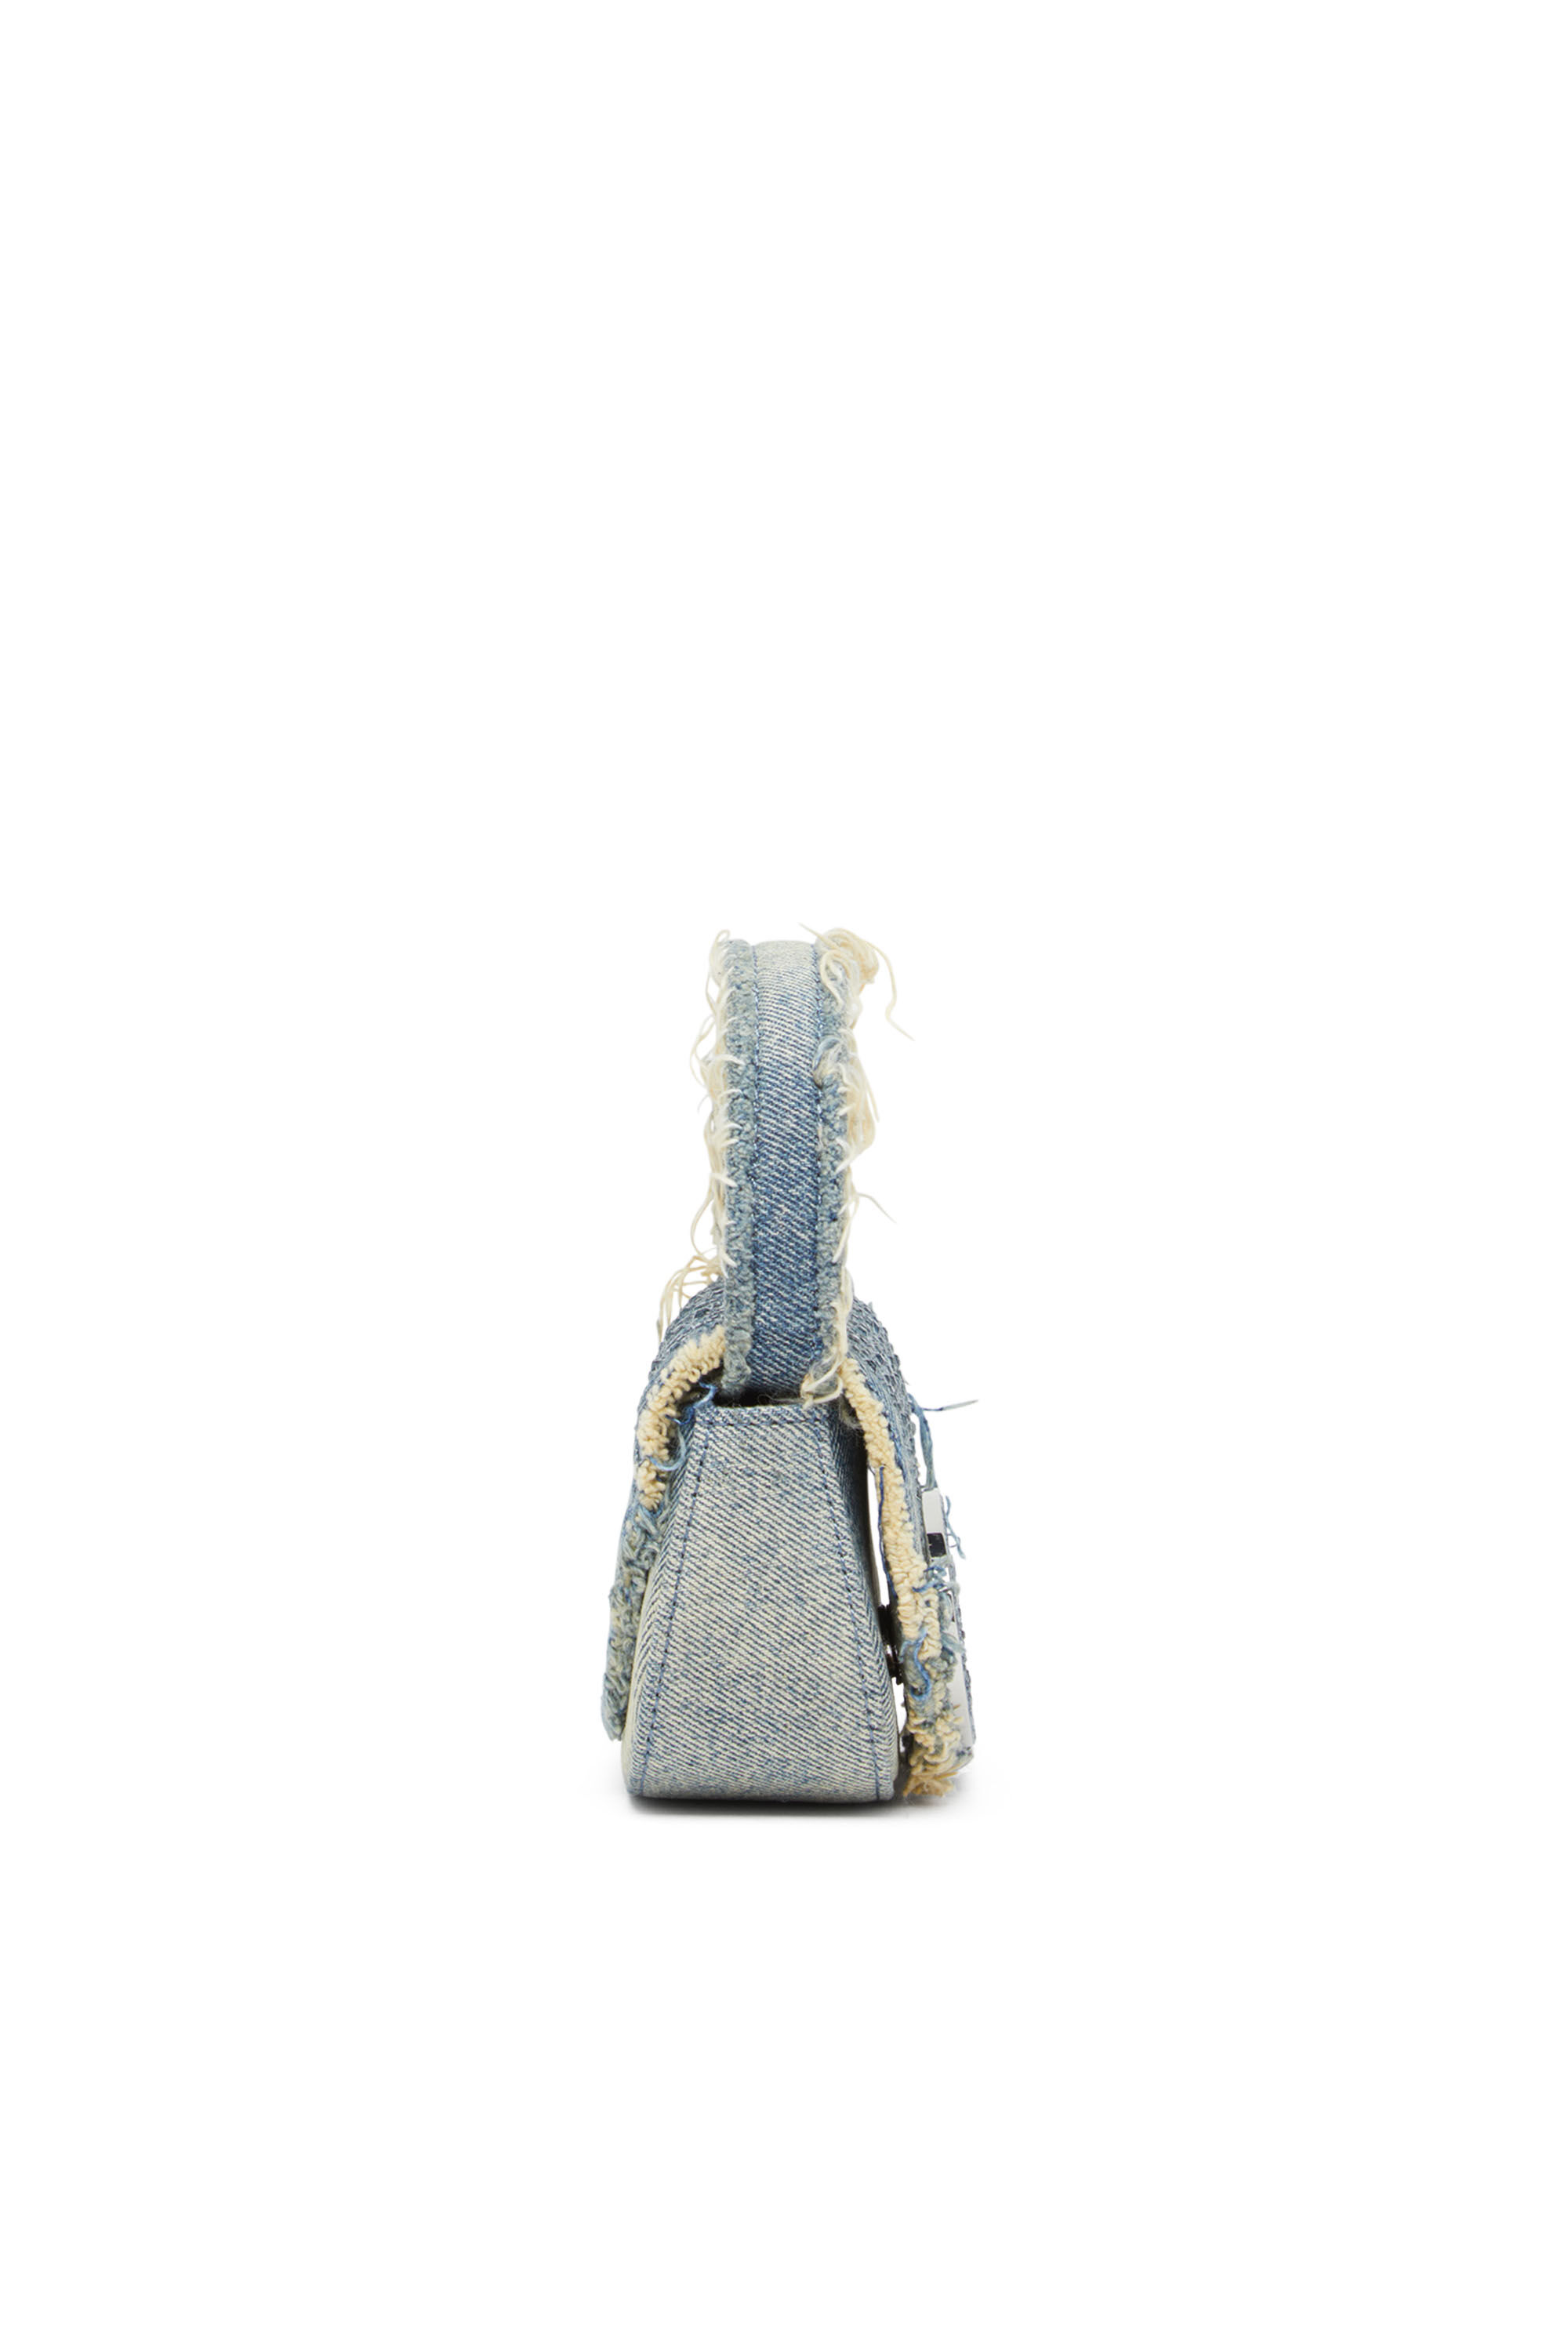 Diesel - 1DR XS, Woman 1DR XS-Iconic mini bag in denim and crystals in Blue - Image 4